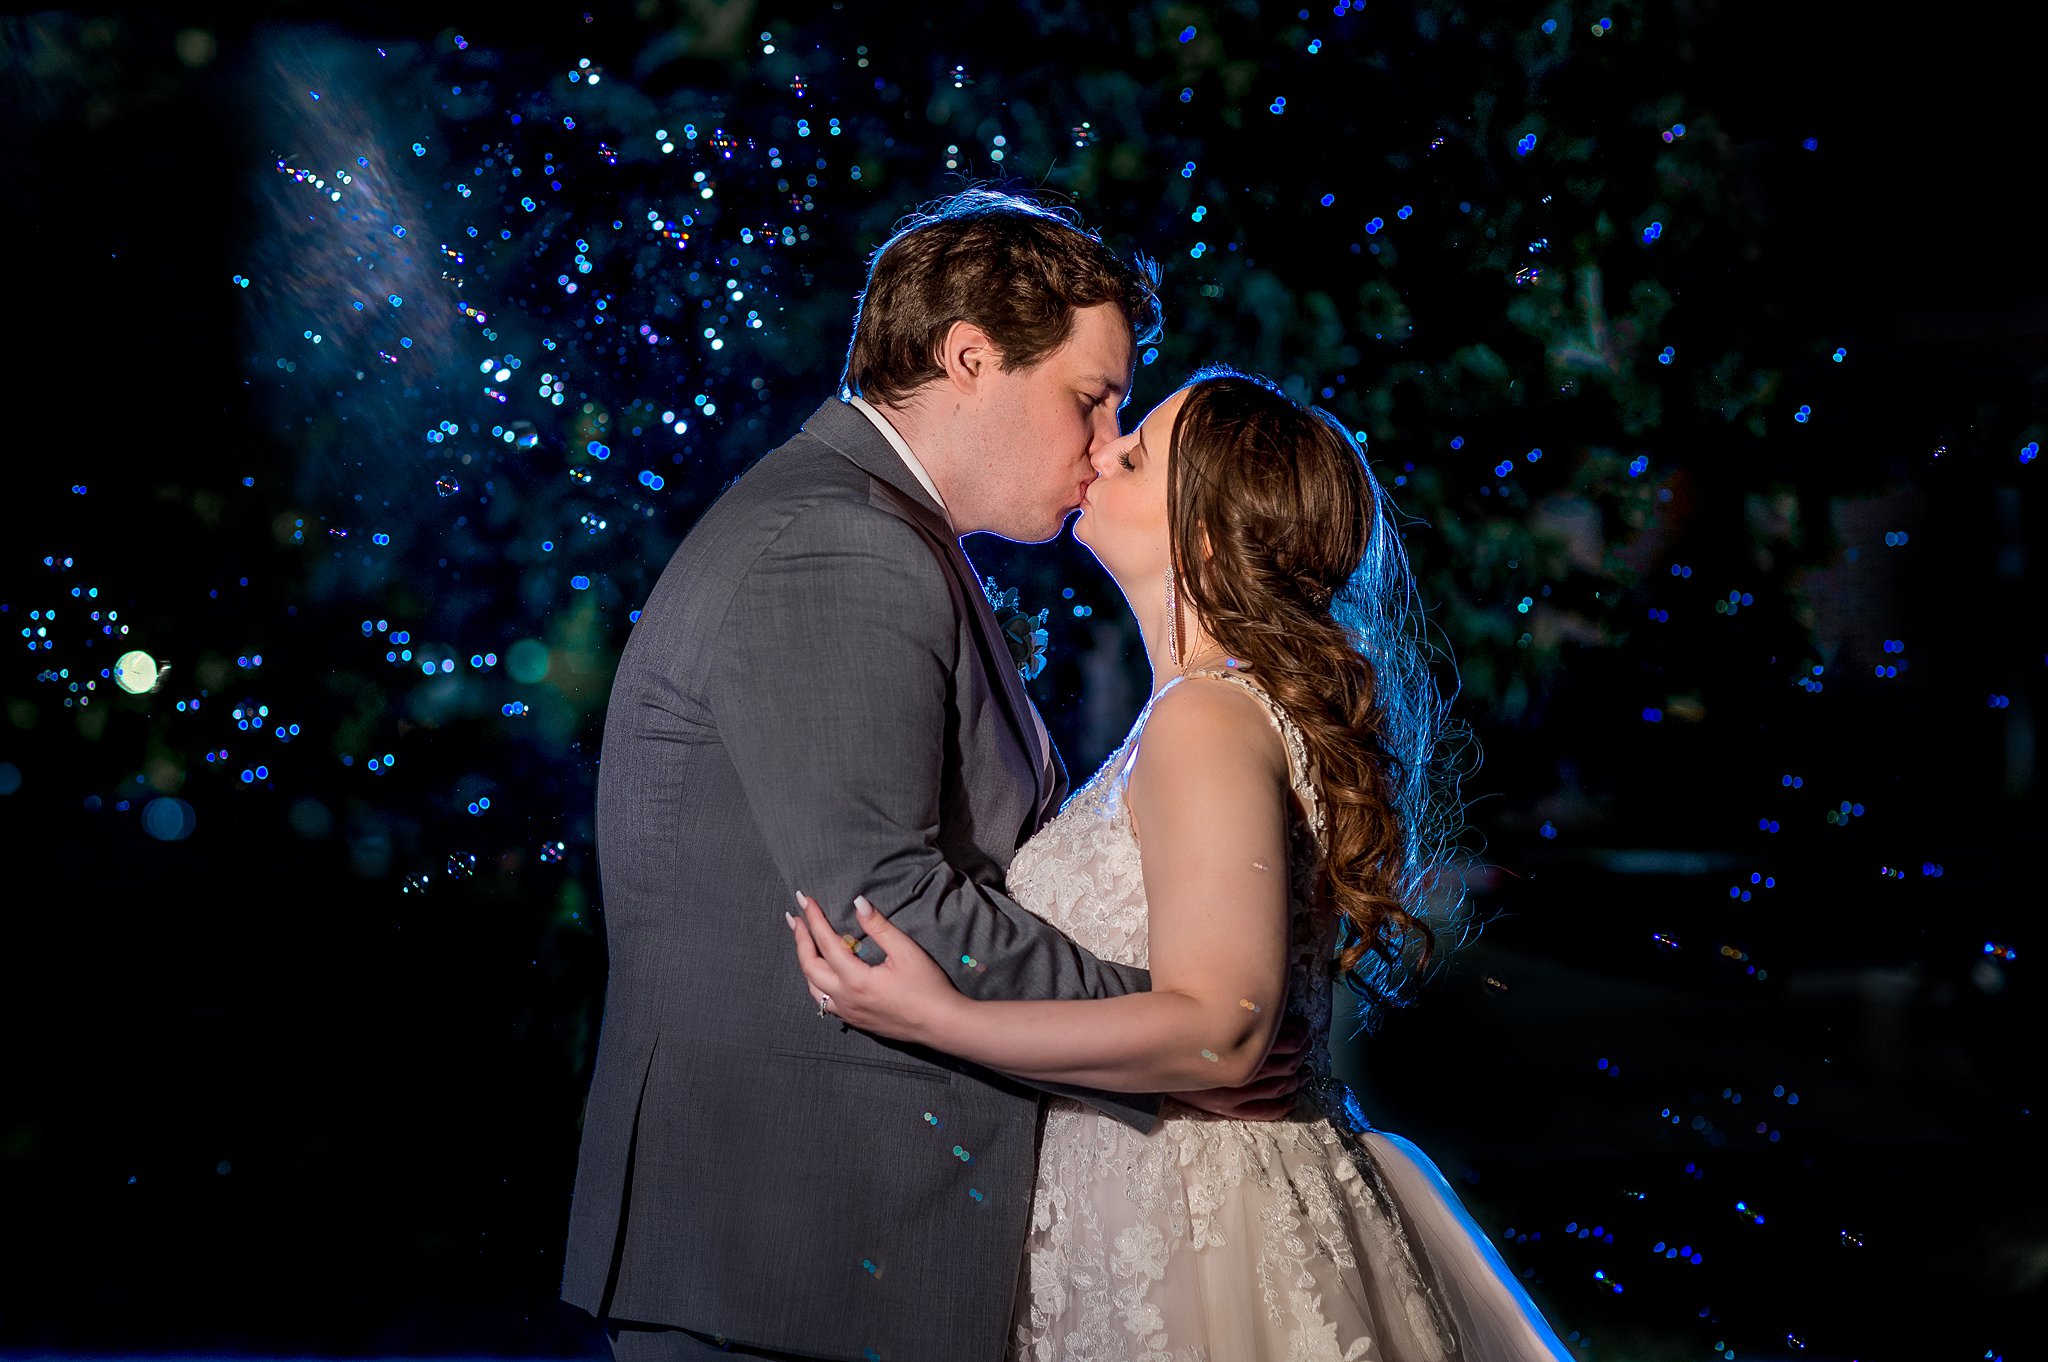 Nighttime wedding portrait in Fargo ND with Bubbles! Image by Abby Anderson 